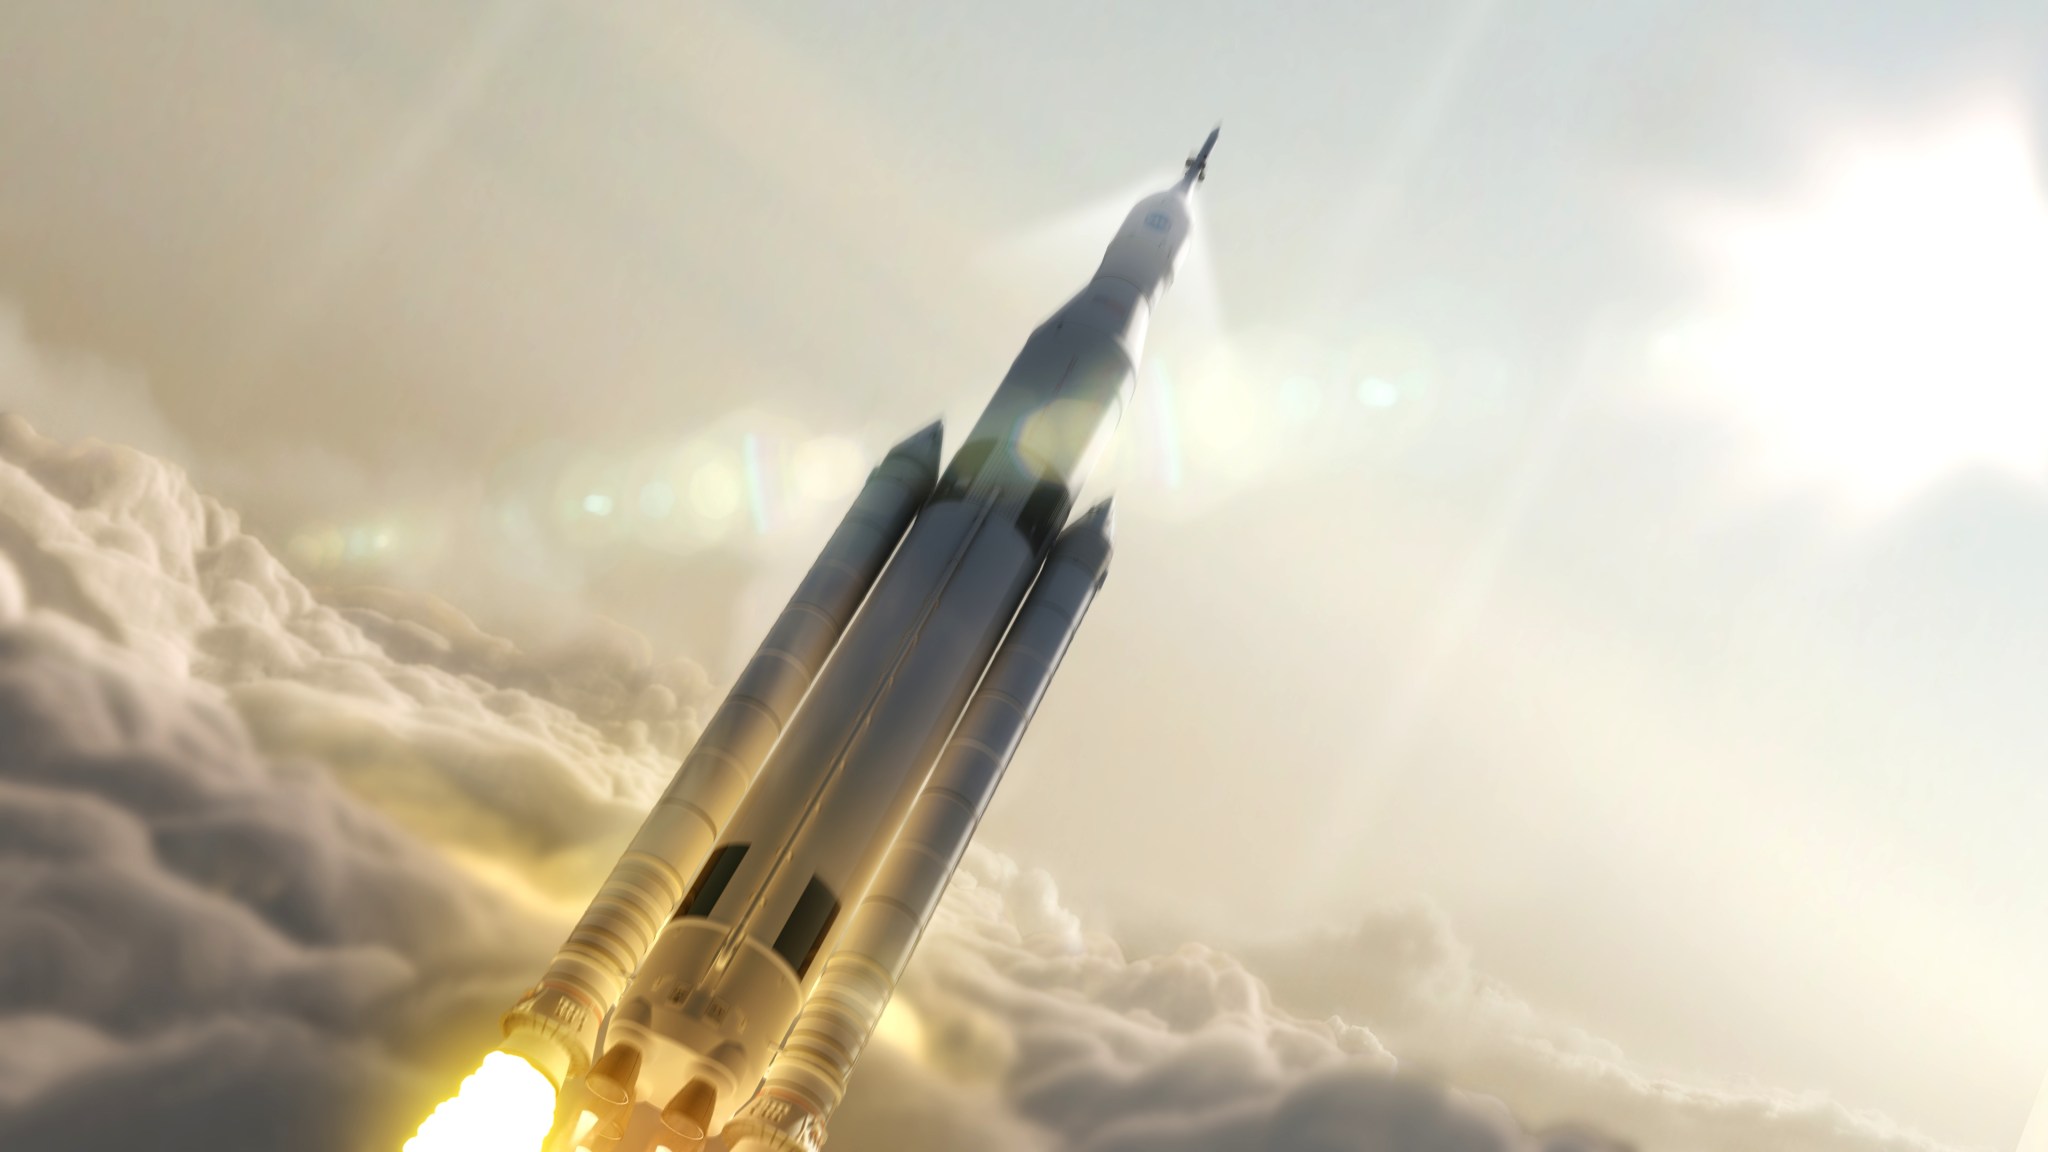 This artist concept depicts NASA’s Space Launch System, which will be the most powerful rocket ever built. It is designed to boost the agency’s Orion spacecraft on deep space missions, including to an asteroid and, ultimately, to Mars.